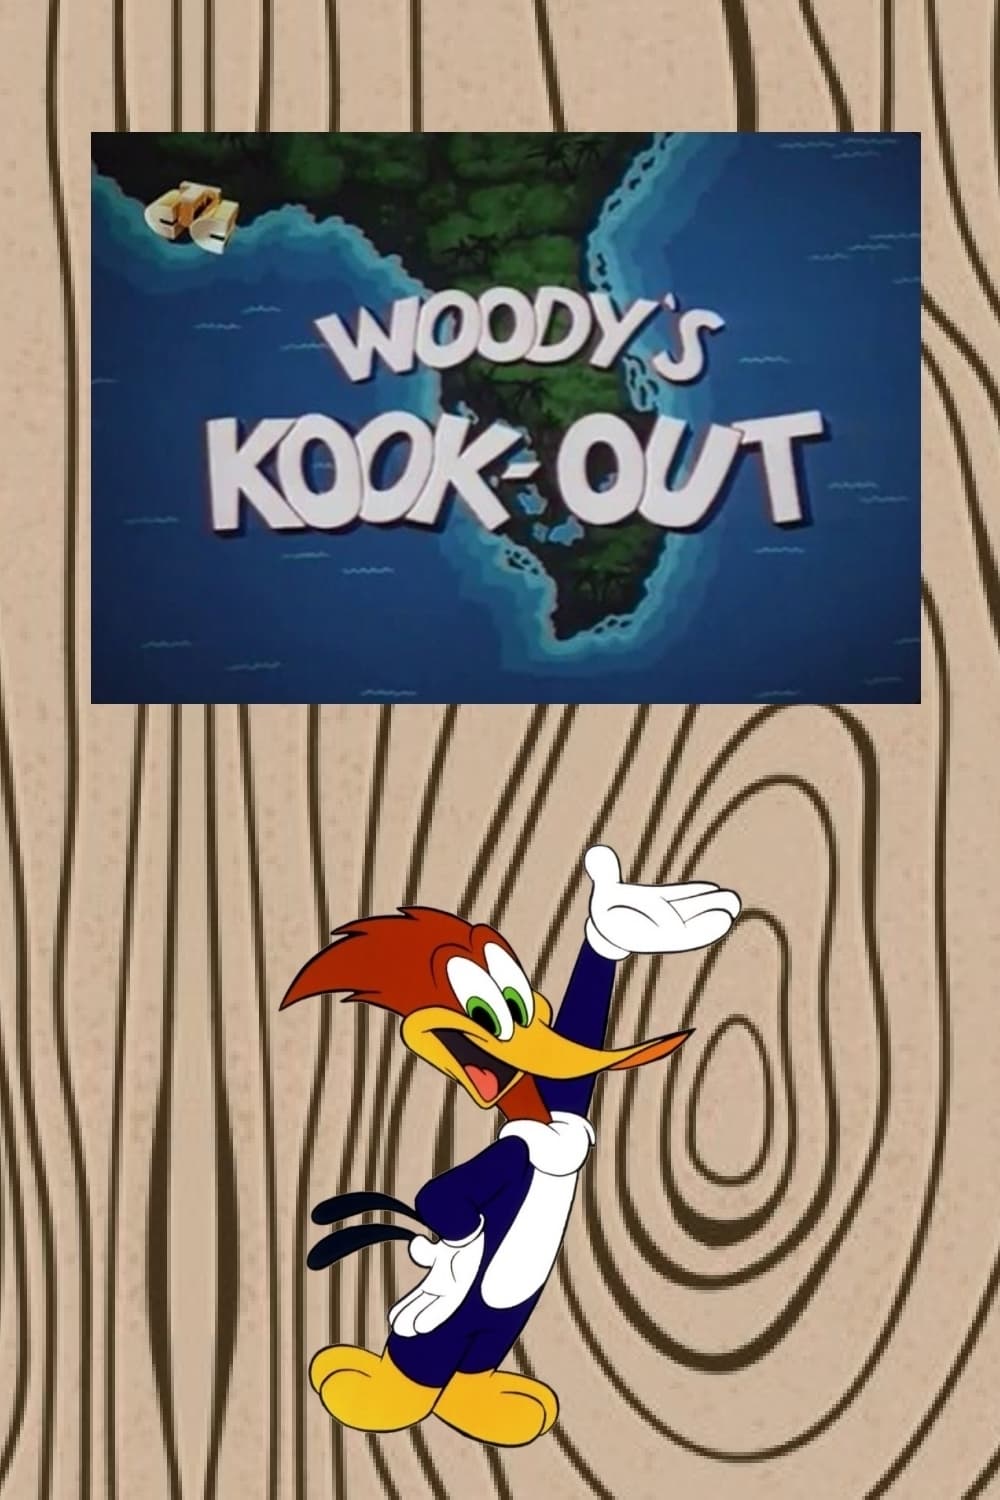 Woody's Kook-Out (1961)